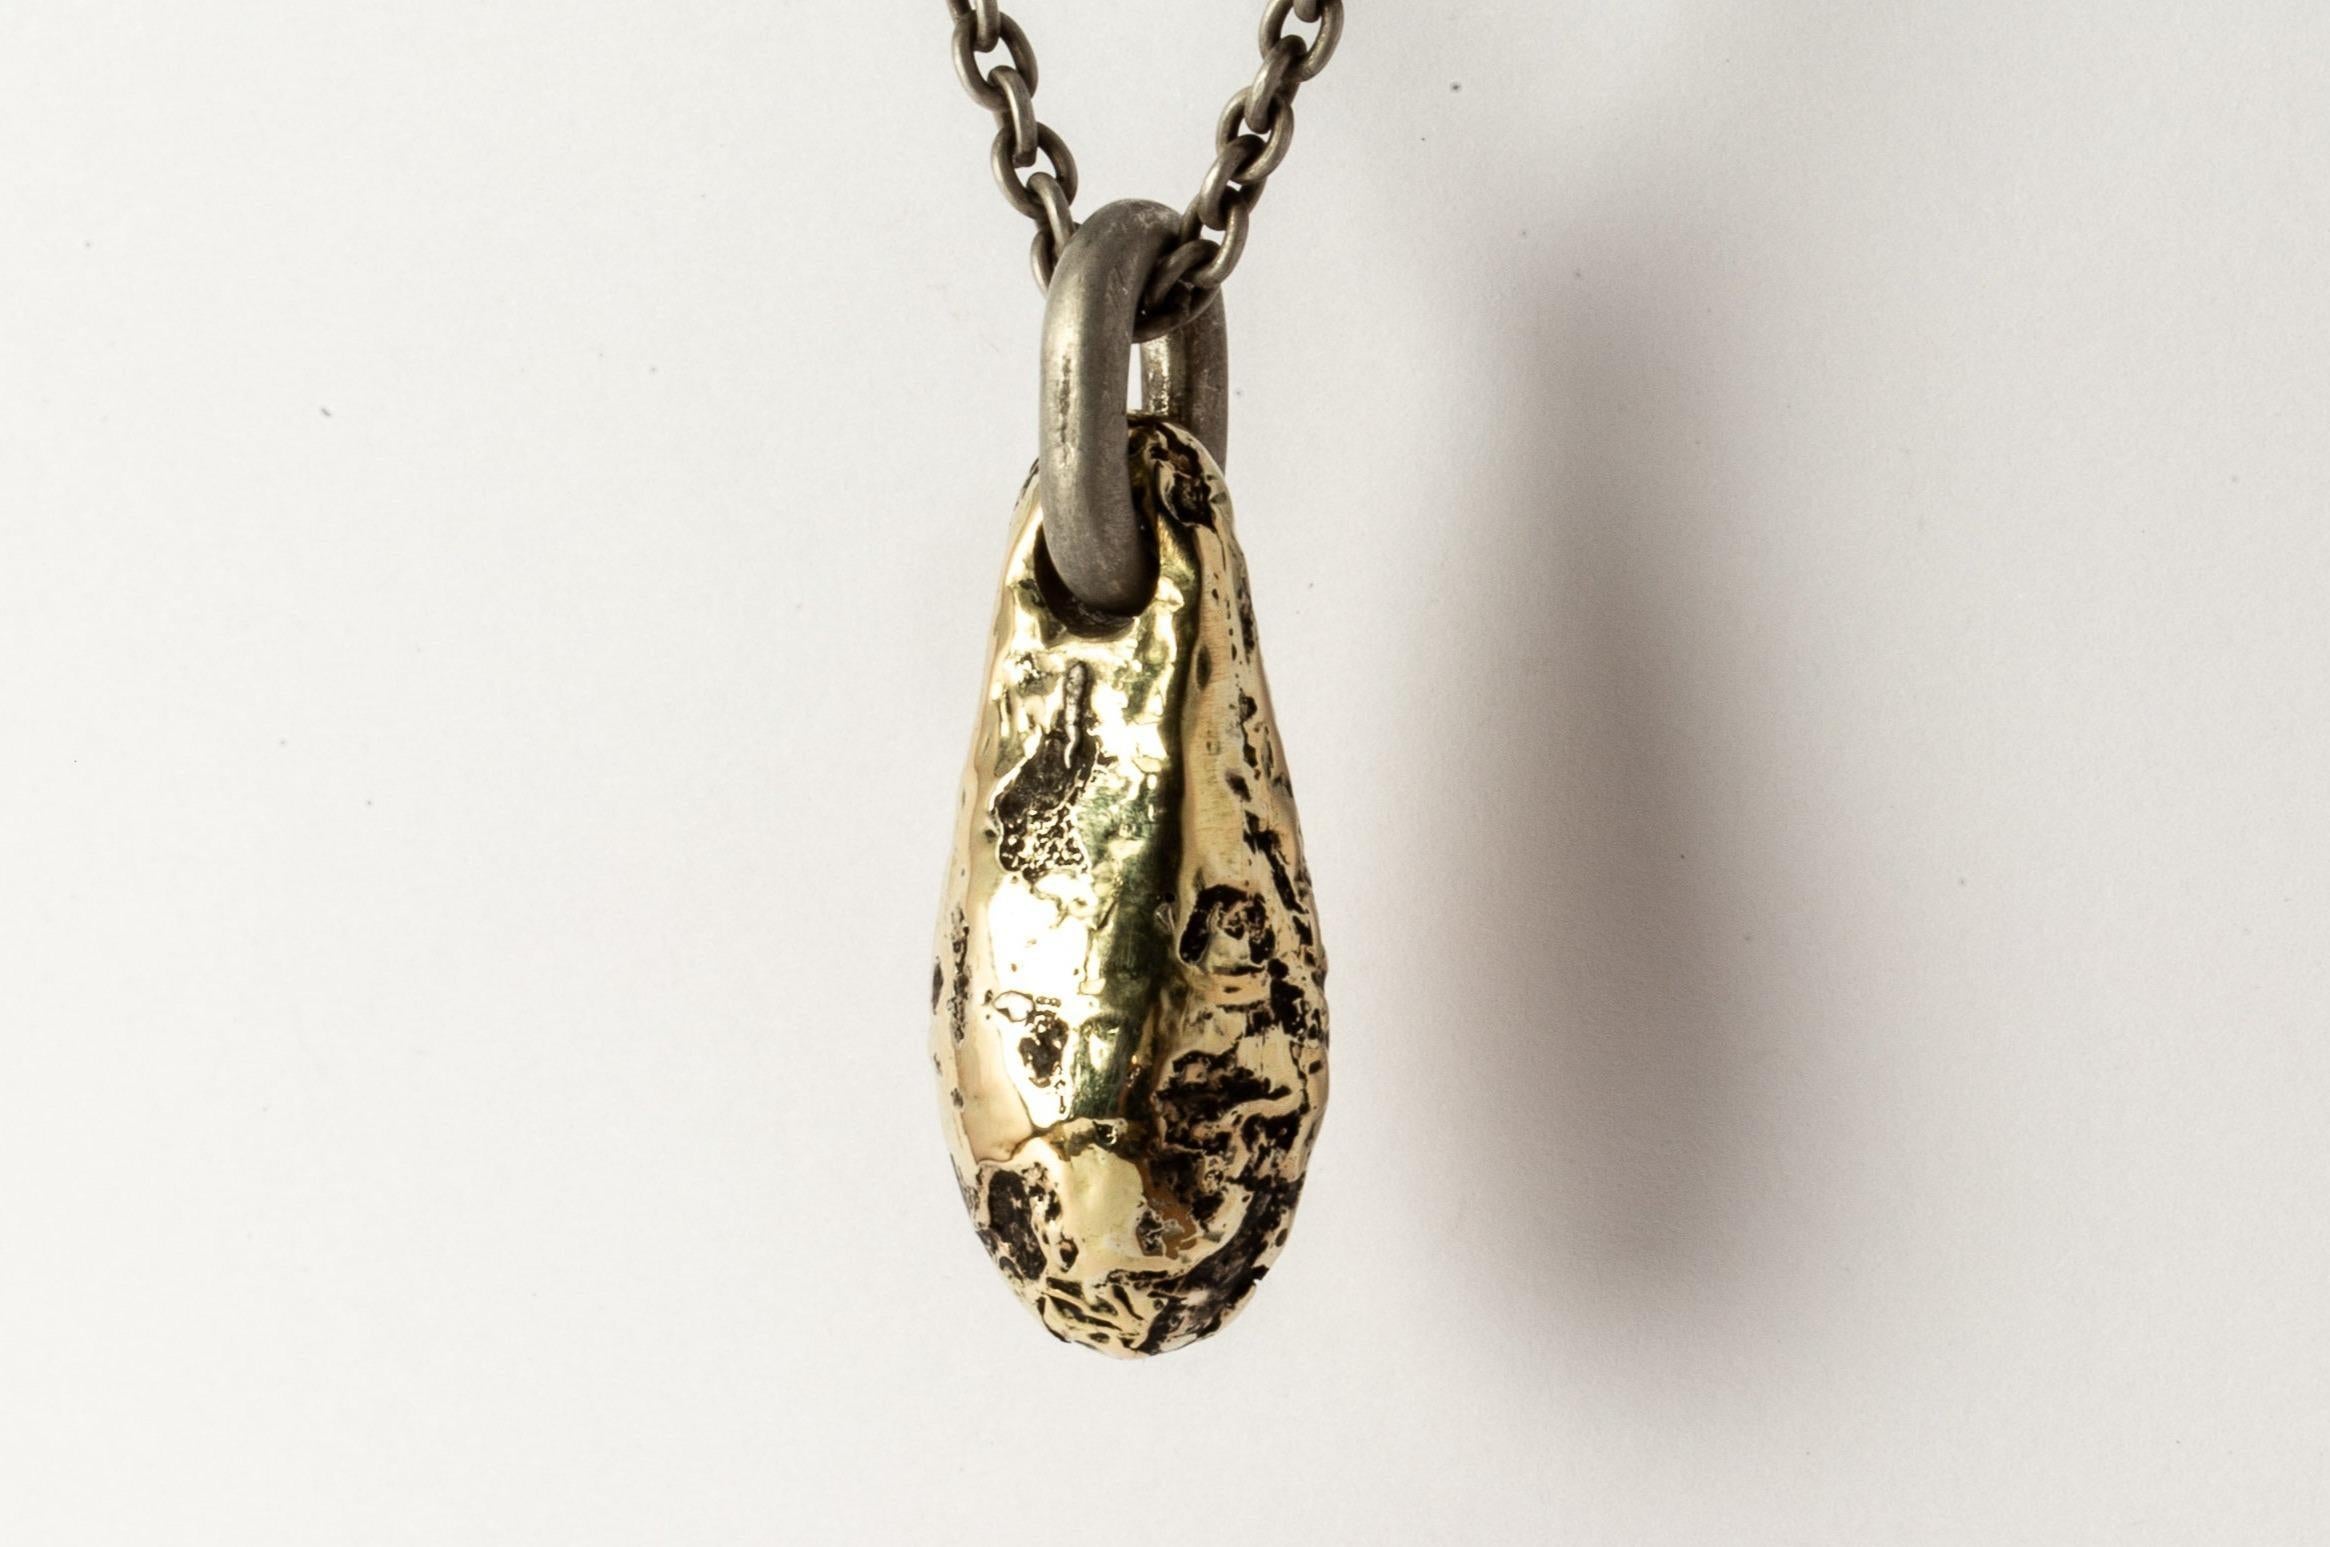 Chrysalis Necklace (Fuse, Nympha, No.3, DA18K) In New Condition For Sale In Hong Kong, Hong Kong Island